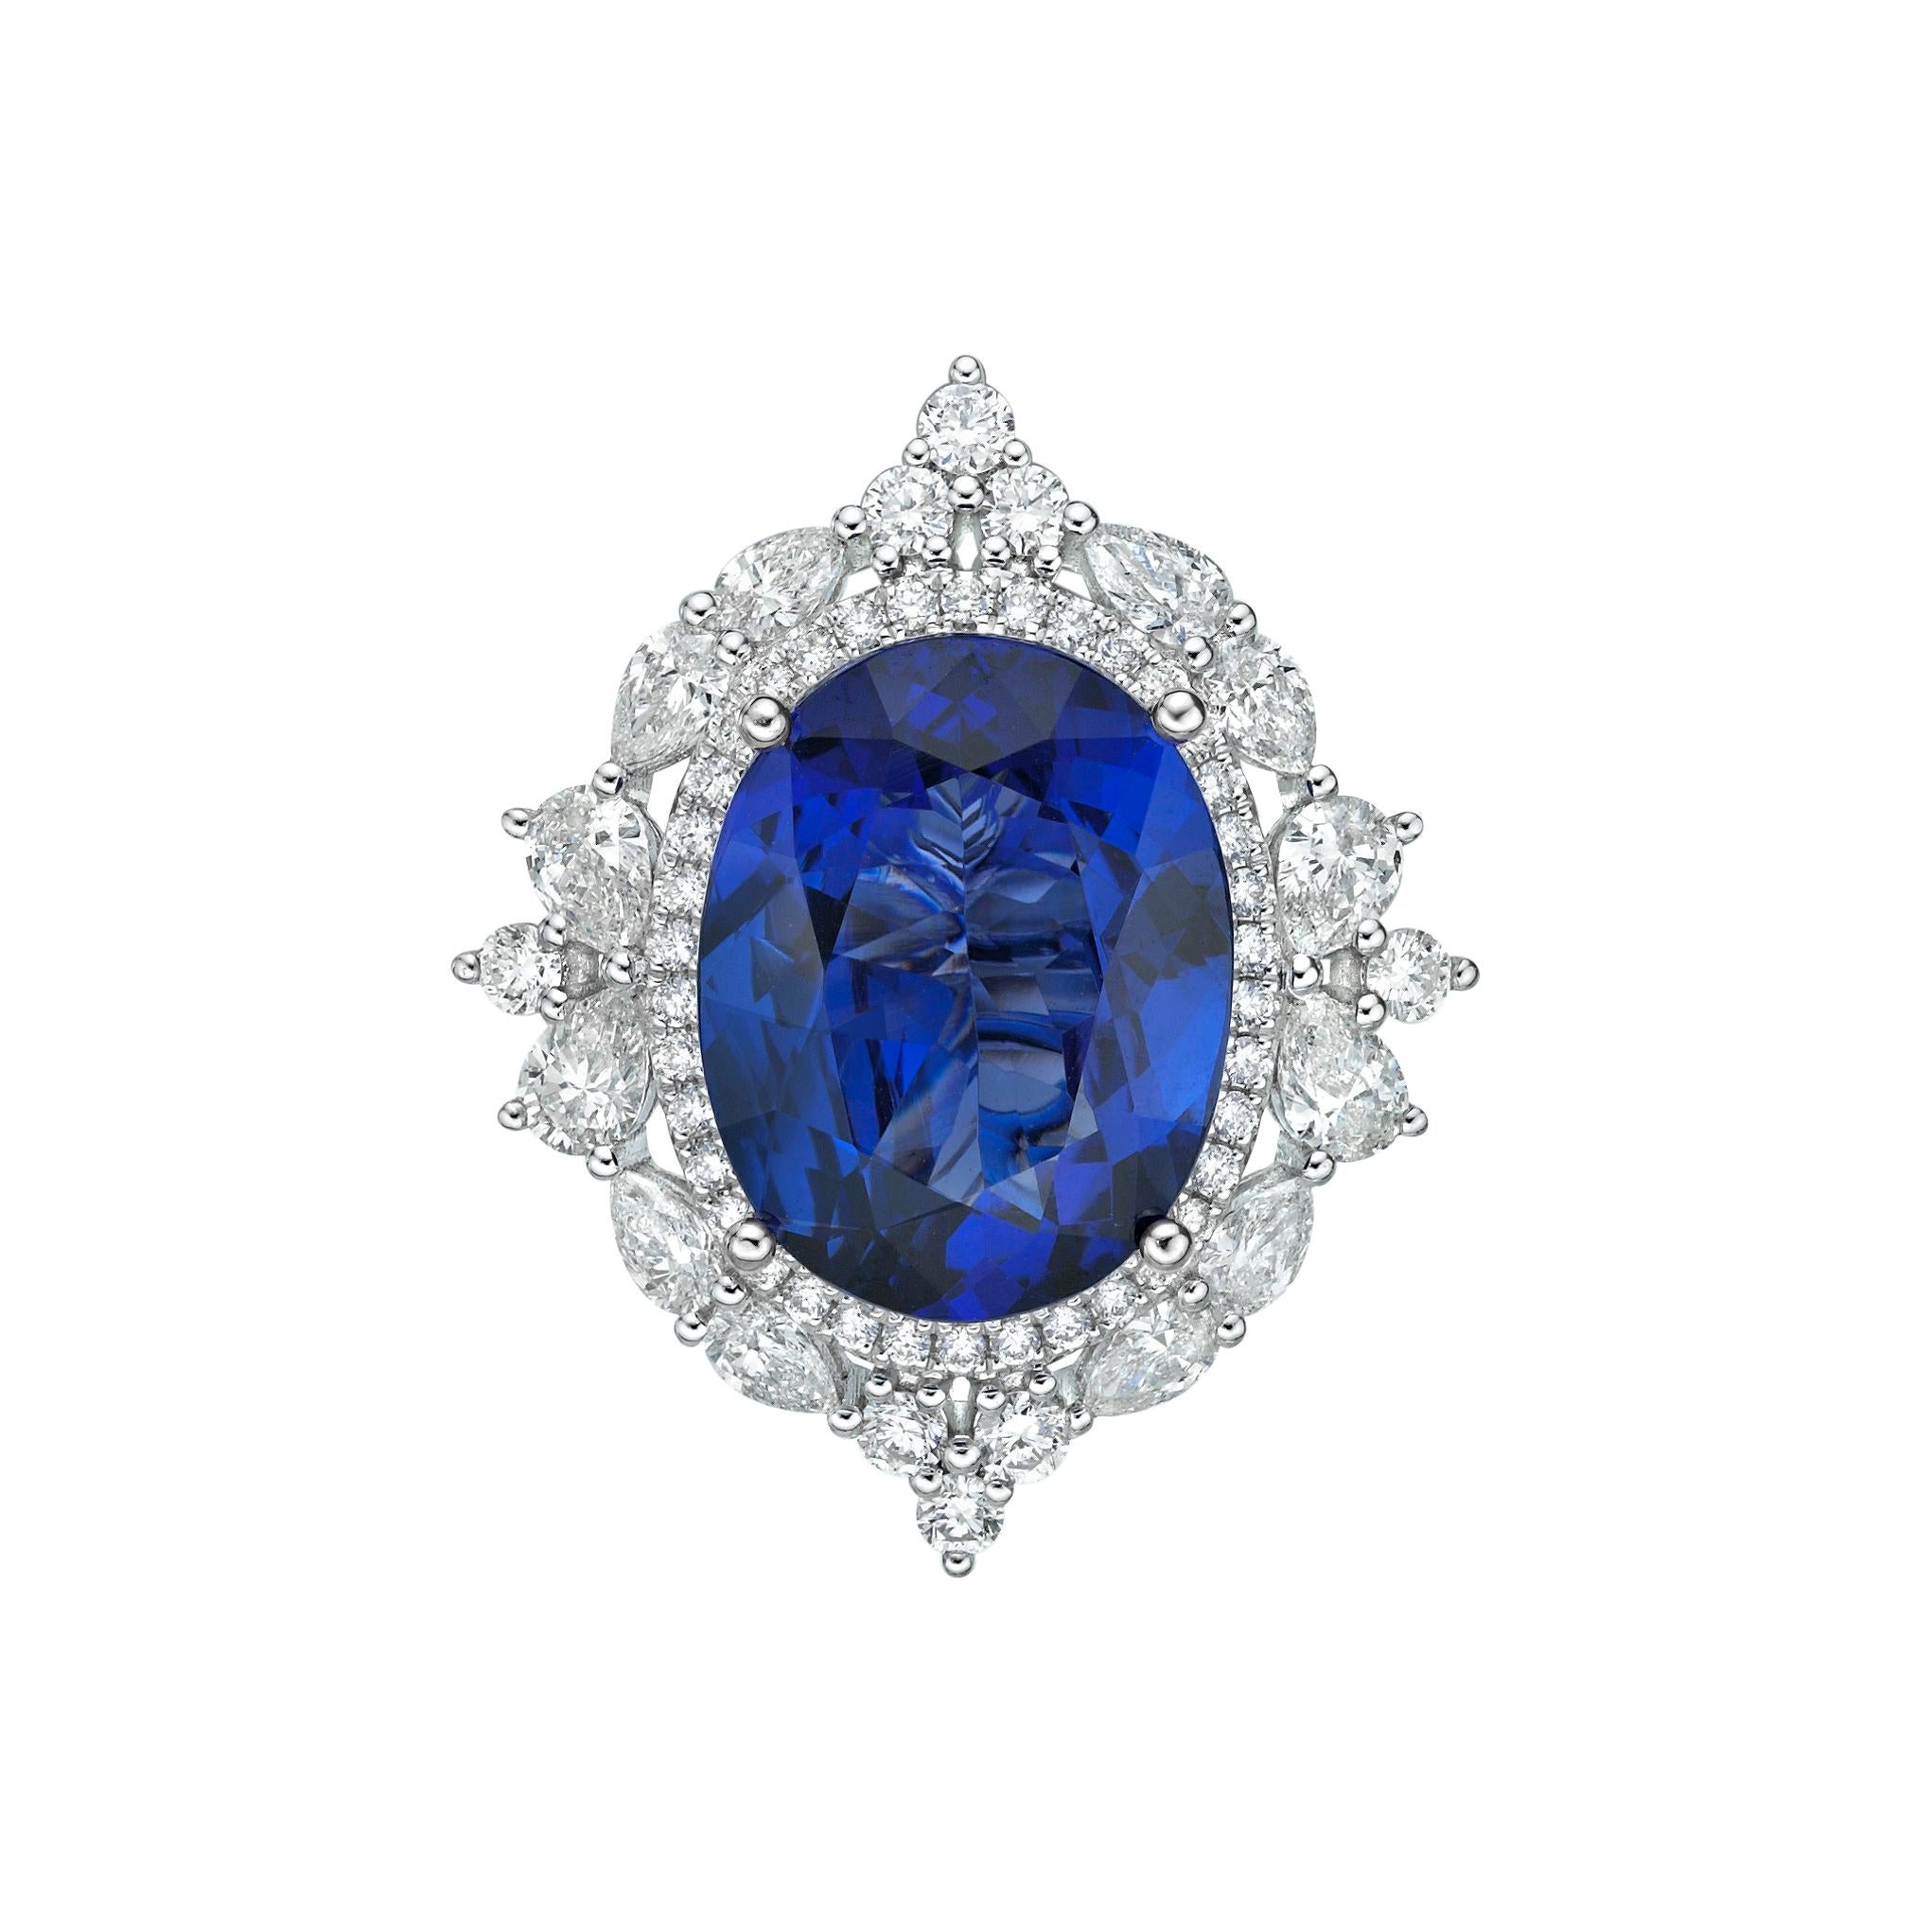 Oval Cut 8.3 Carat Tanzanite and White Diamond Ring in 18 Karat White Gold For Sale